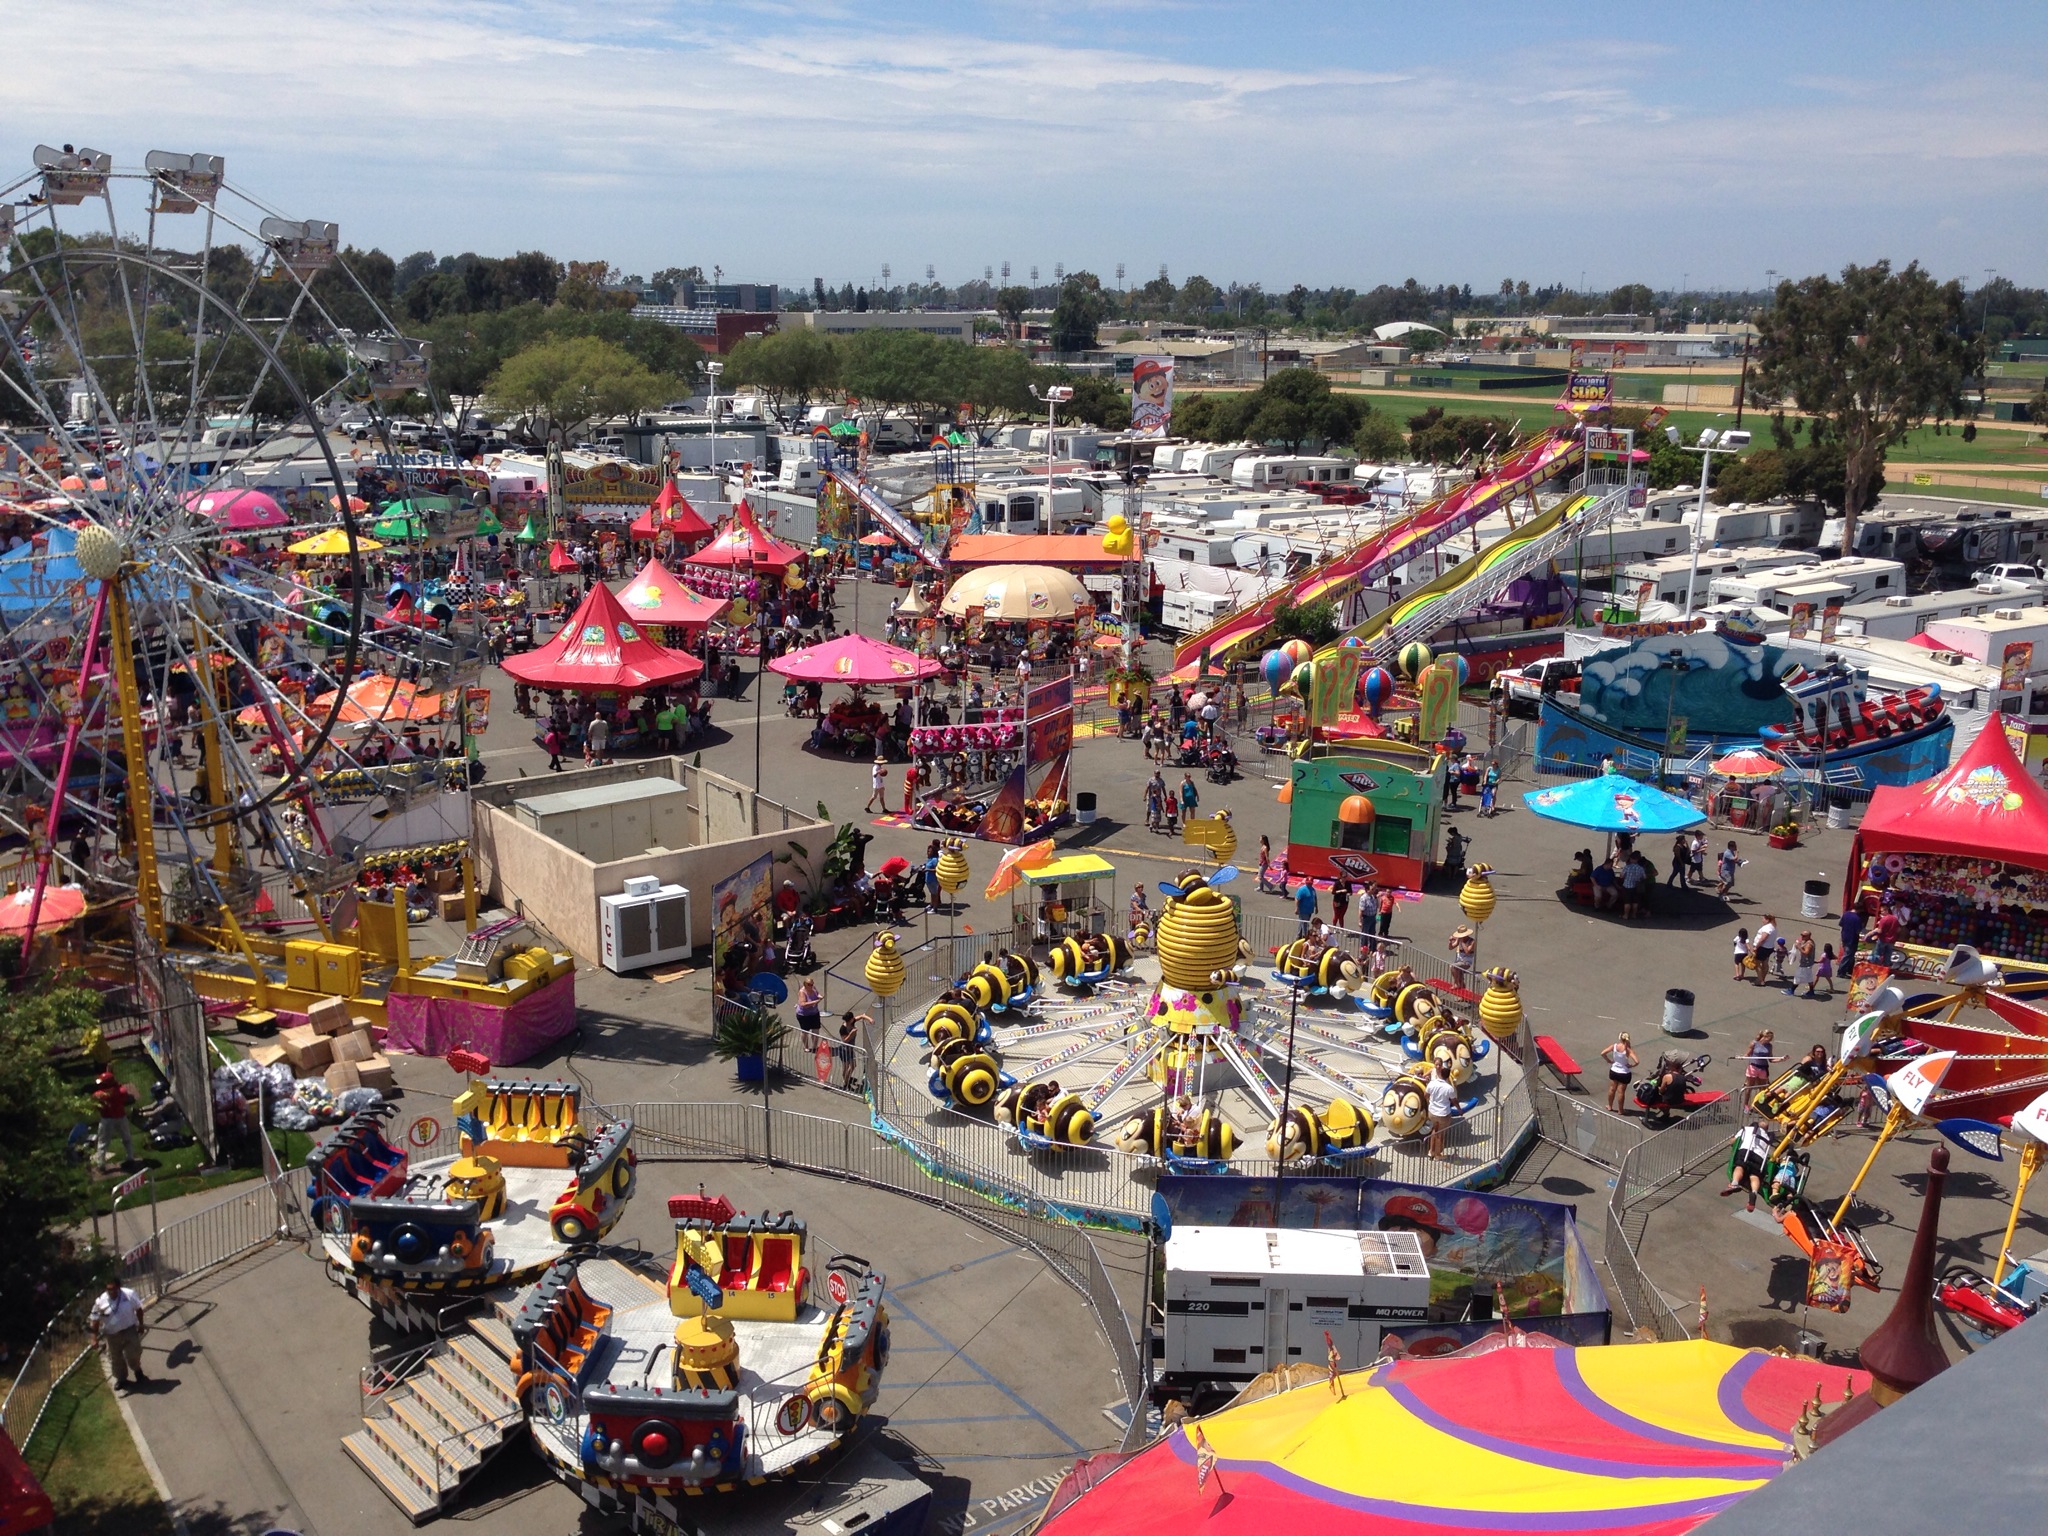 A Day of Festivity and Fun at Orange County’s Annual Fair Gentlemen's